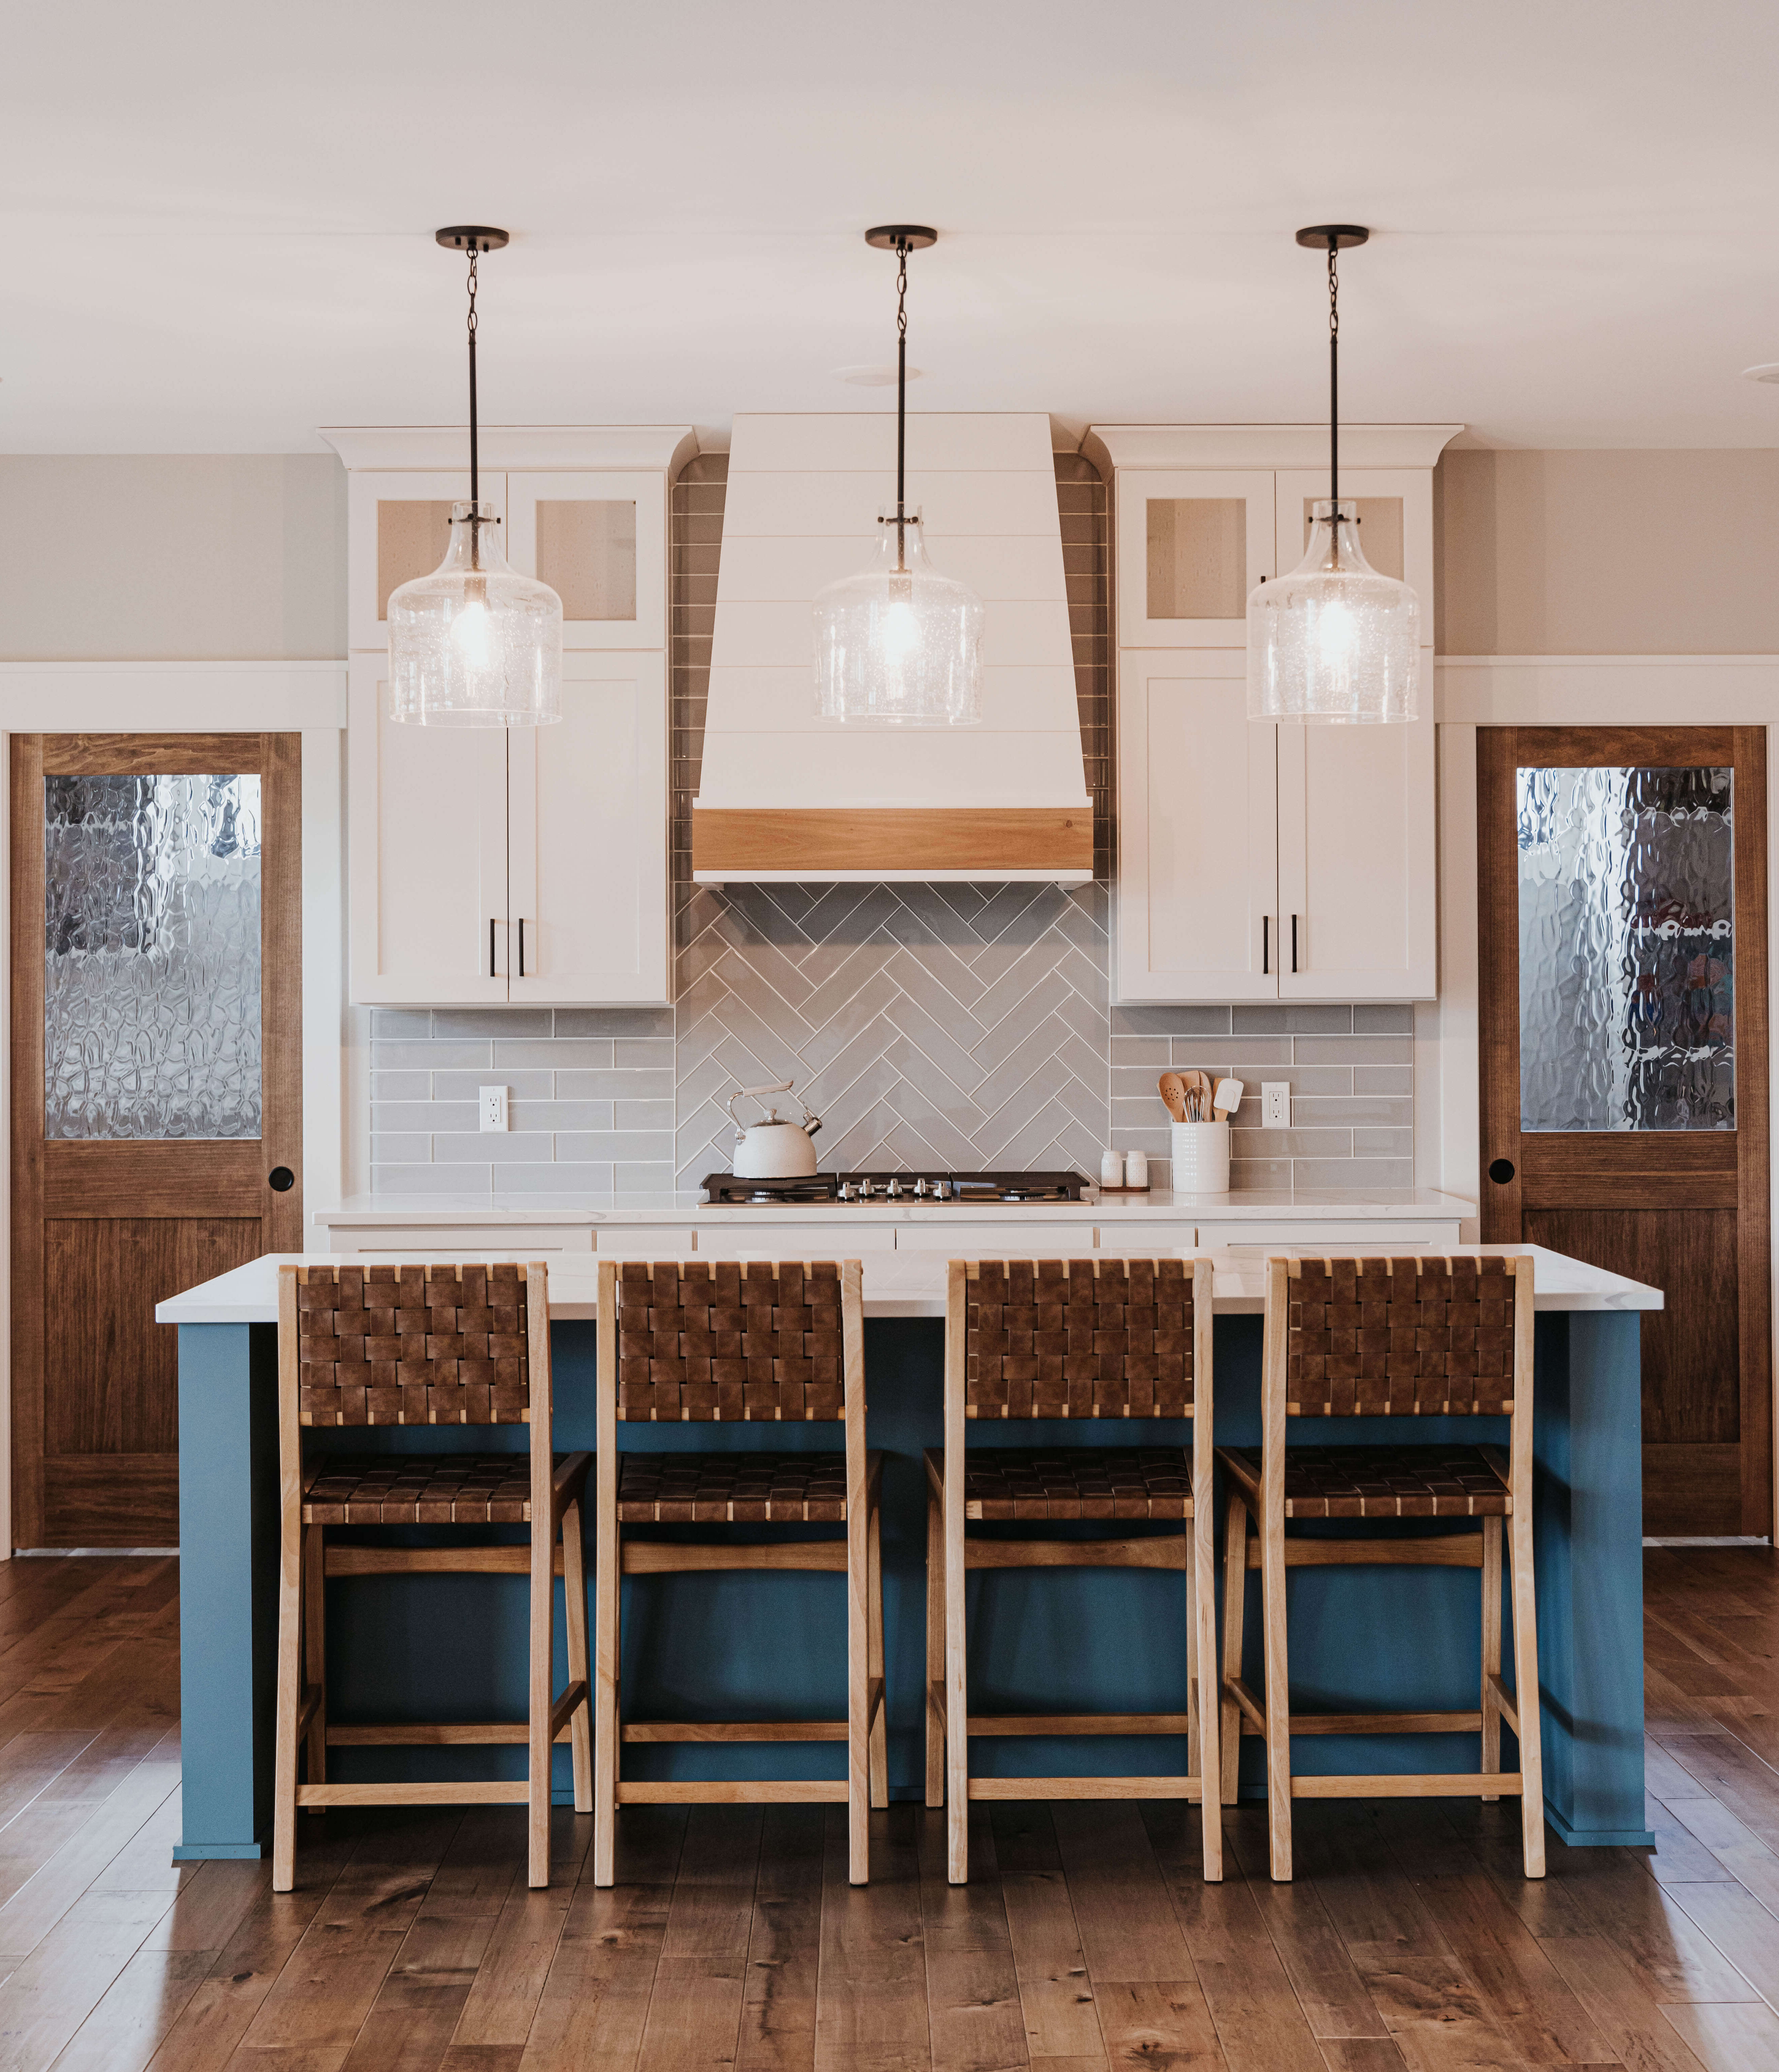 A beautiful kitchen with a custom blue painted kitchen island from Dura Supreme Cabinetry.